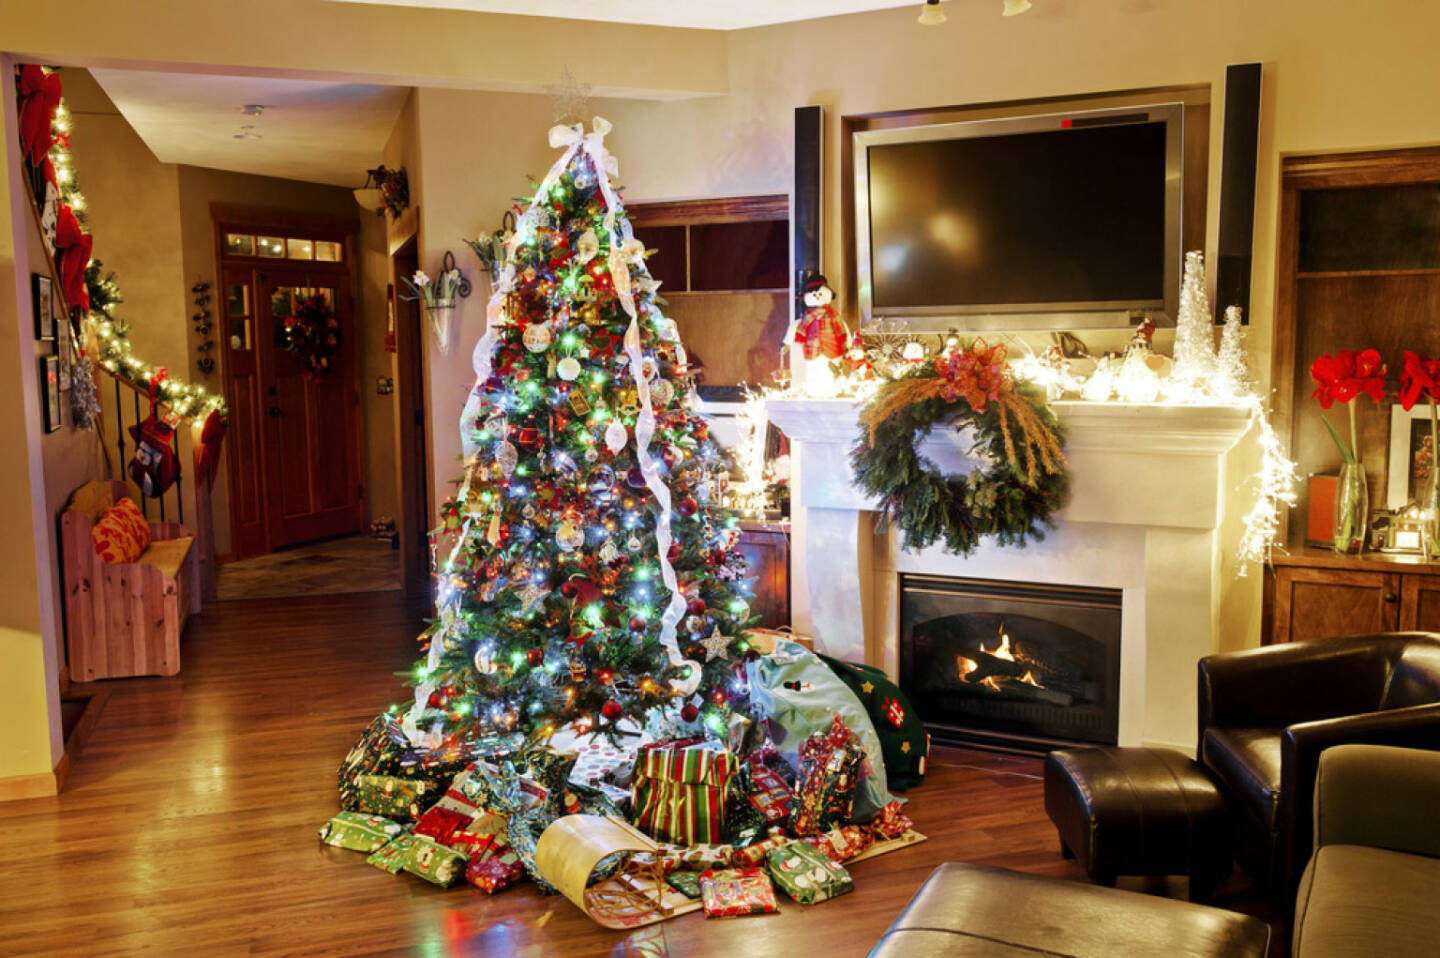 Weihnachten, USA, Weihnachtsbaum, Geschenke, Wohzimmer, Weihnachtsabend, http://www.shutterstock.com/de/pic-226188664/stock-photo-a-christmas-eve-scene-notice-all-of-the-presents-and-the-christmas-tree.html